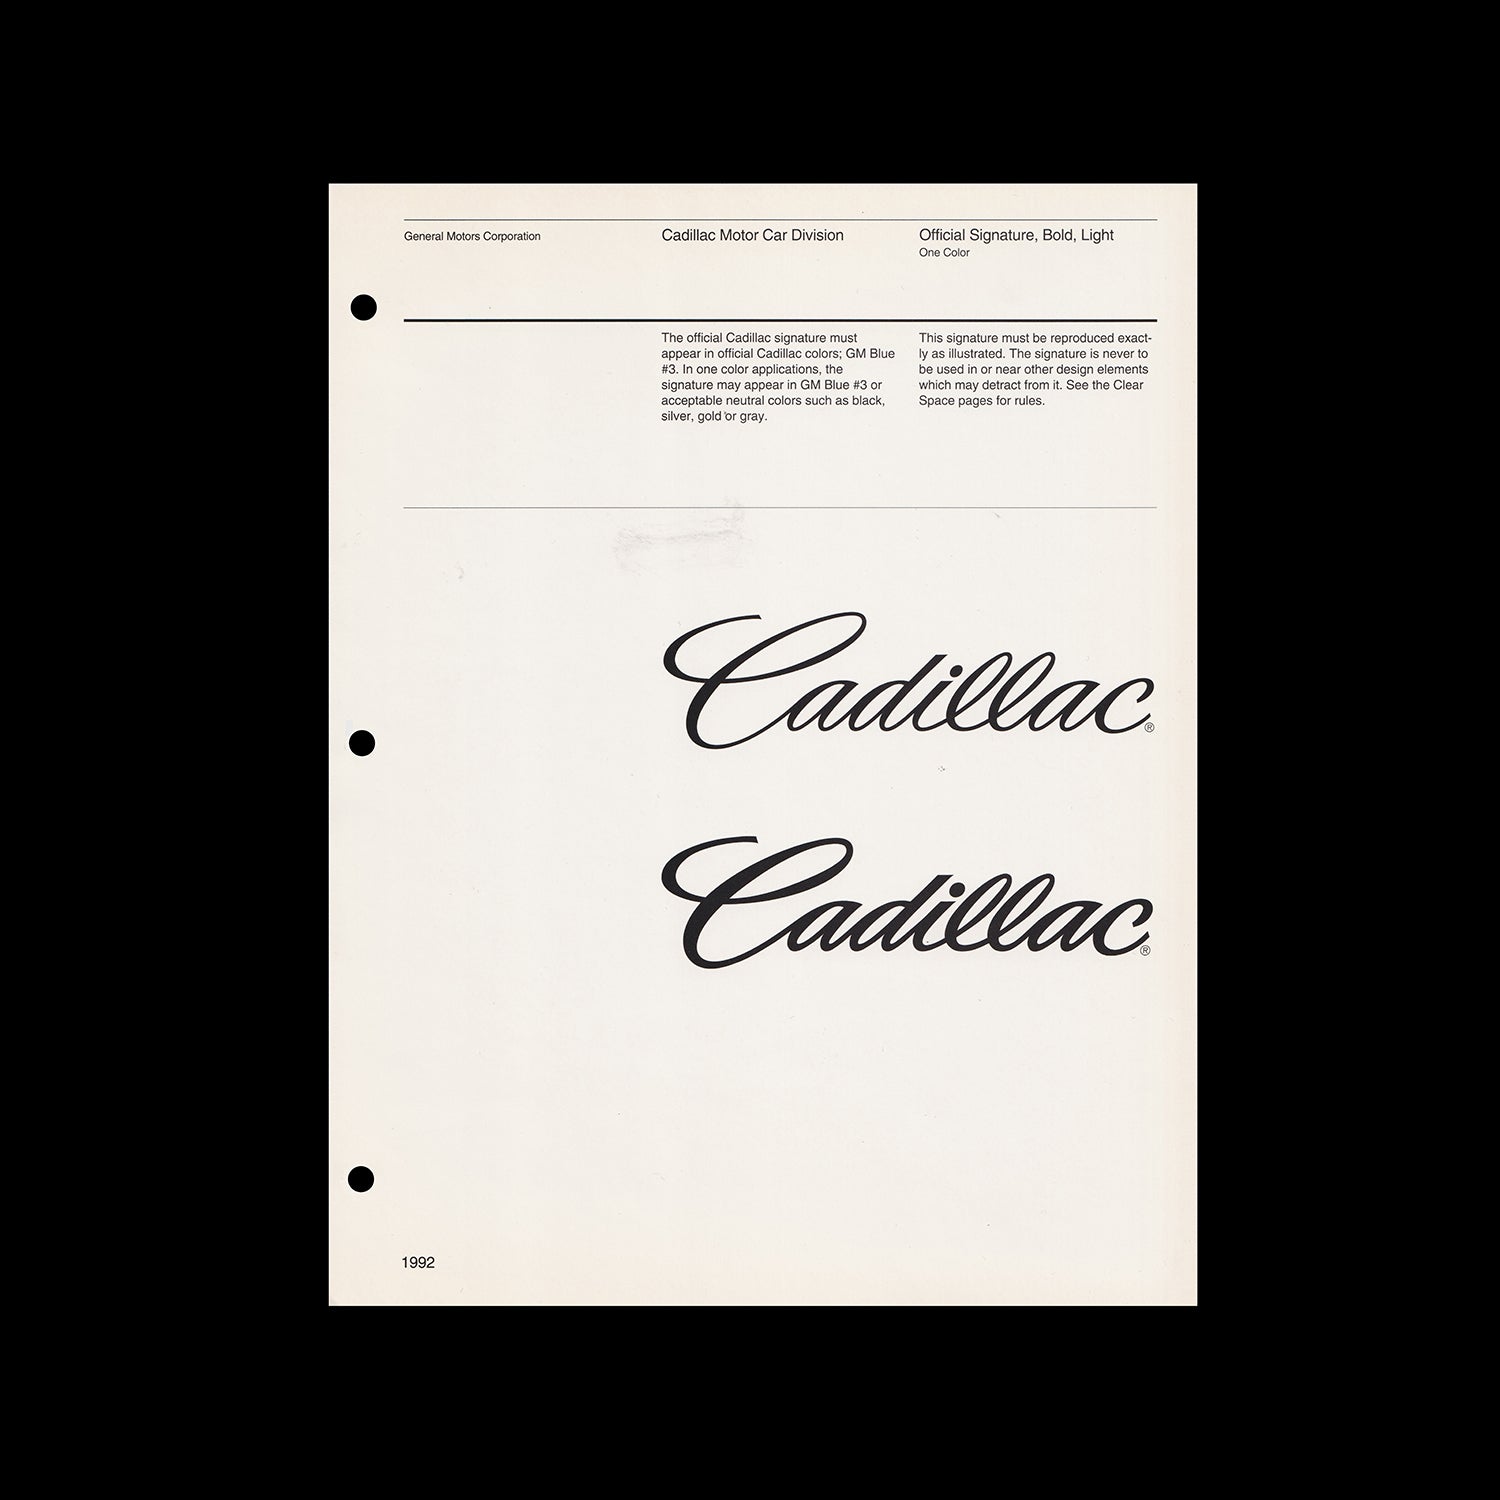 Cadillac Identification Guidelines Manual, 1992